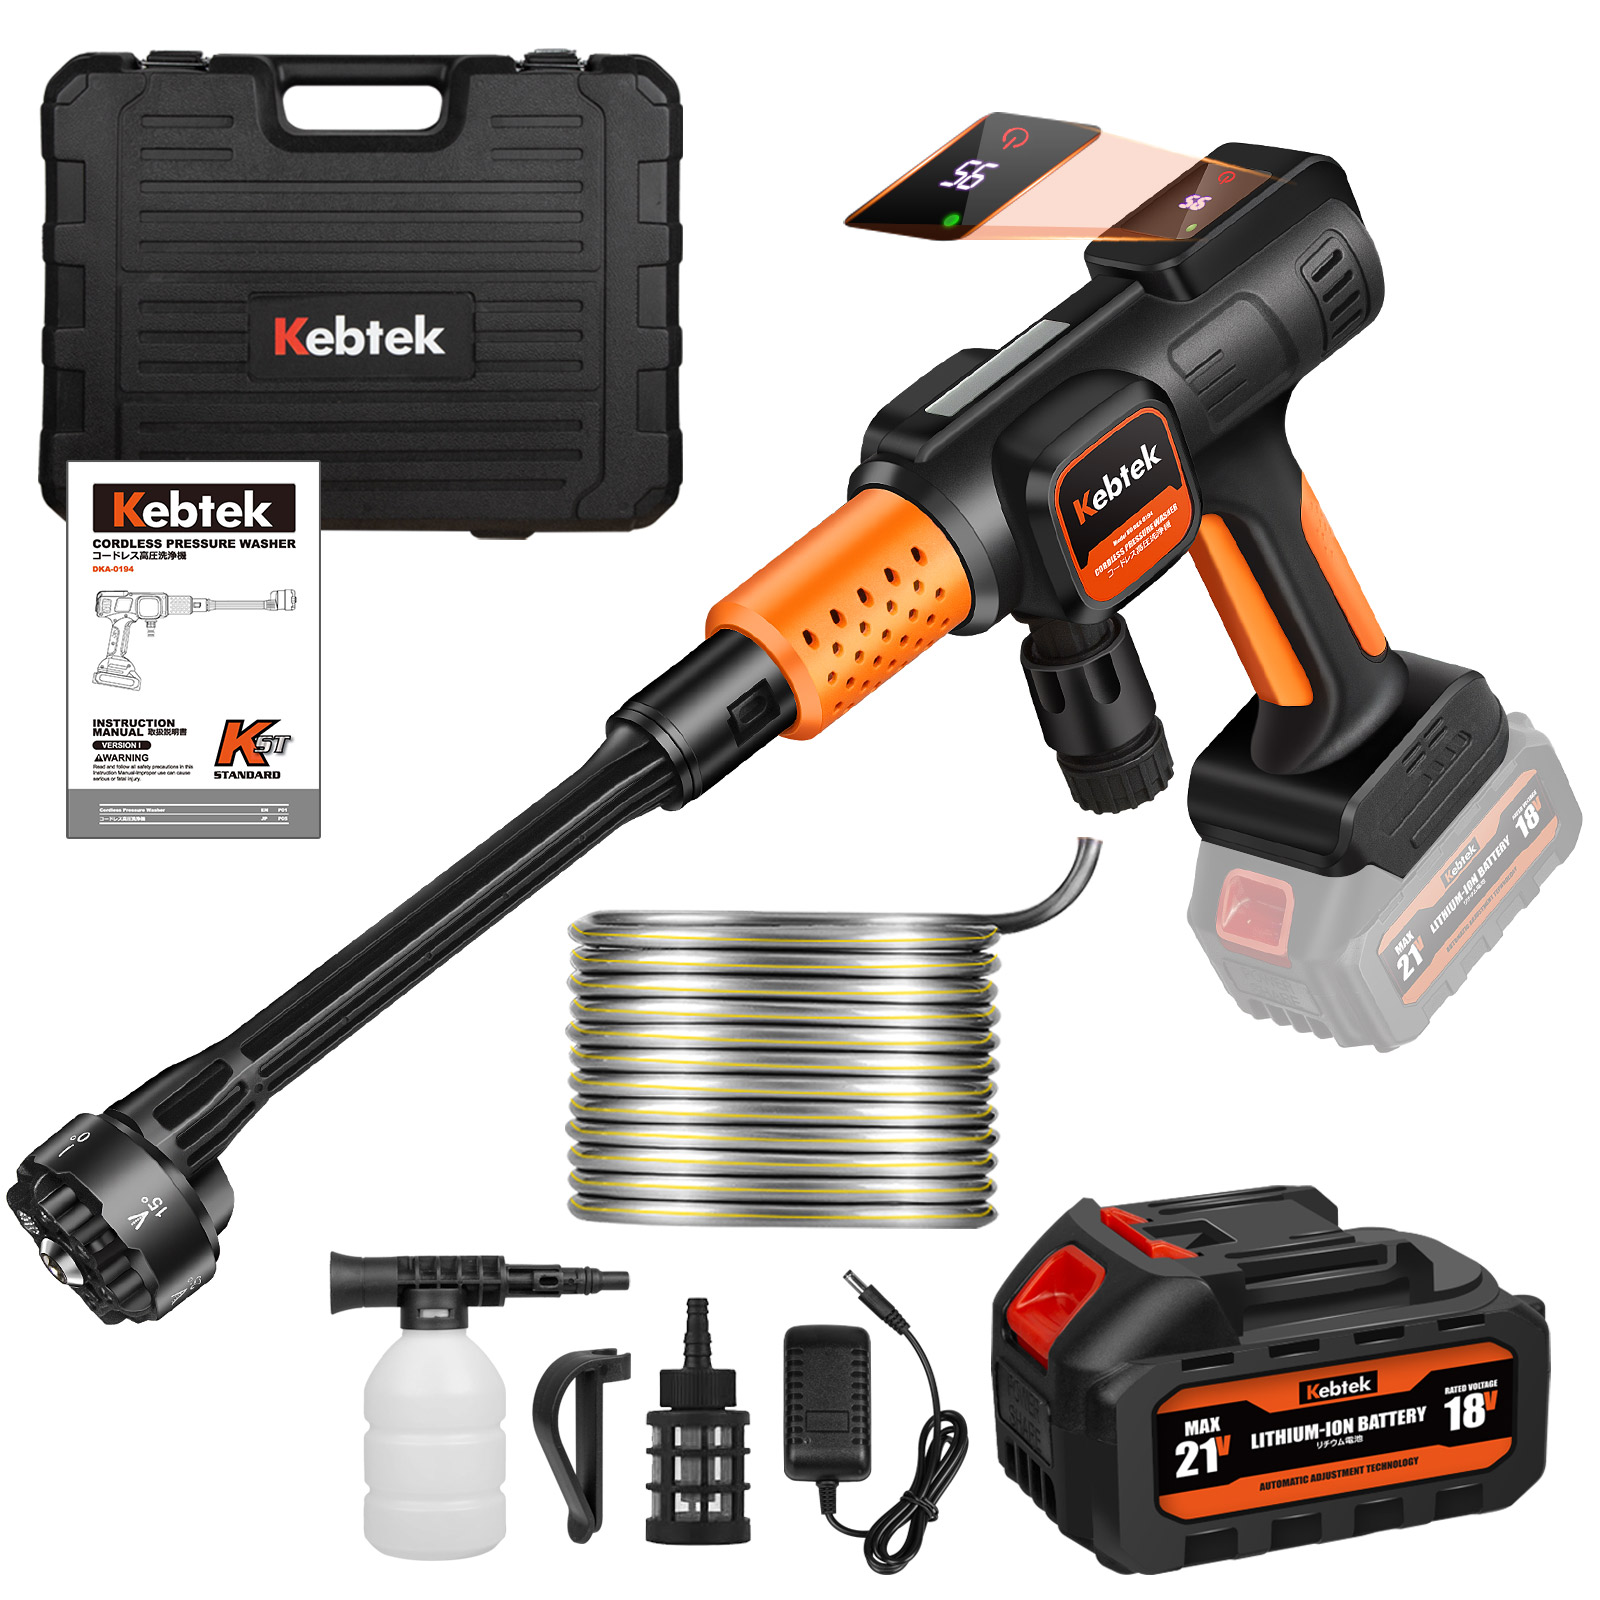 Kebtek Cordless Pressure Washer Gun, 21V Cordless Portable Power Washer Battery Powered 652 PSI with 6-in-1 Spray Nozzle Soap Dipenser 2AH Battery for Car/Fence/Floor Cleaning & Watering